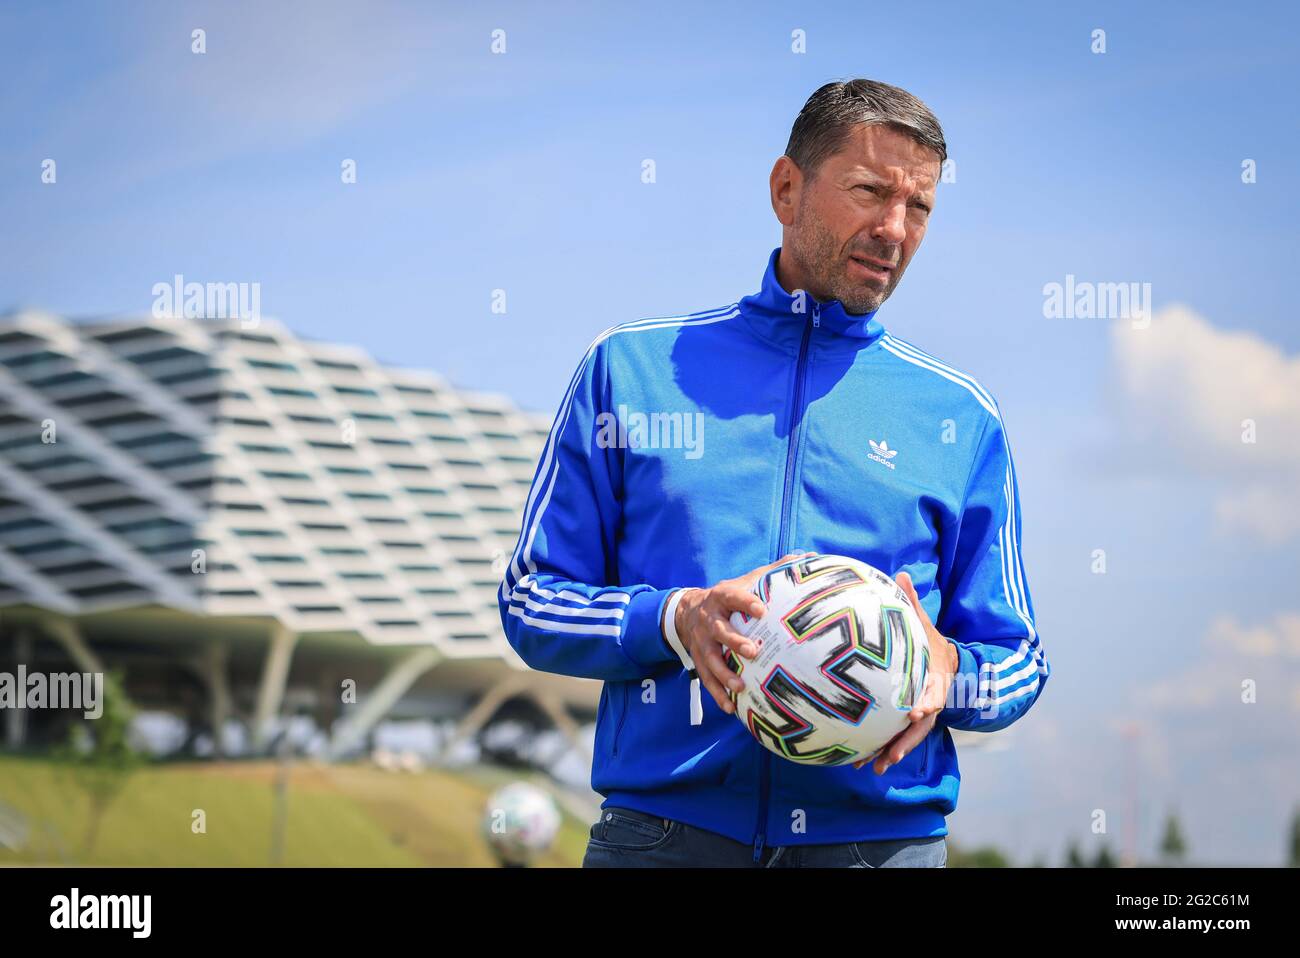 Herzogenaurach, Germany. 10th June, 2021. Kasper Rorsted (2nd from right),  CEO of Adidas AG, holds an official EURO 2020 "Uniforia" match ball during  an interview in front of the DFB media centre